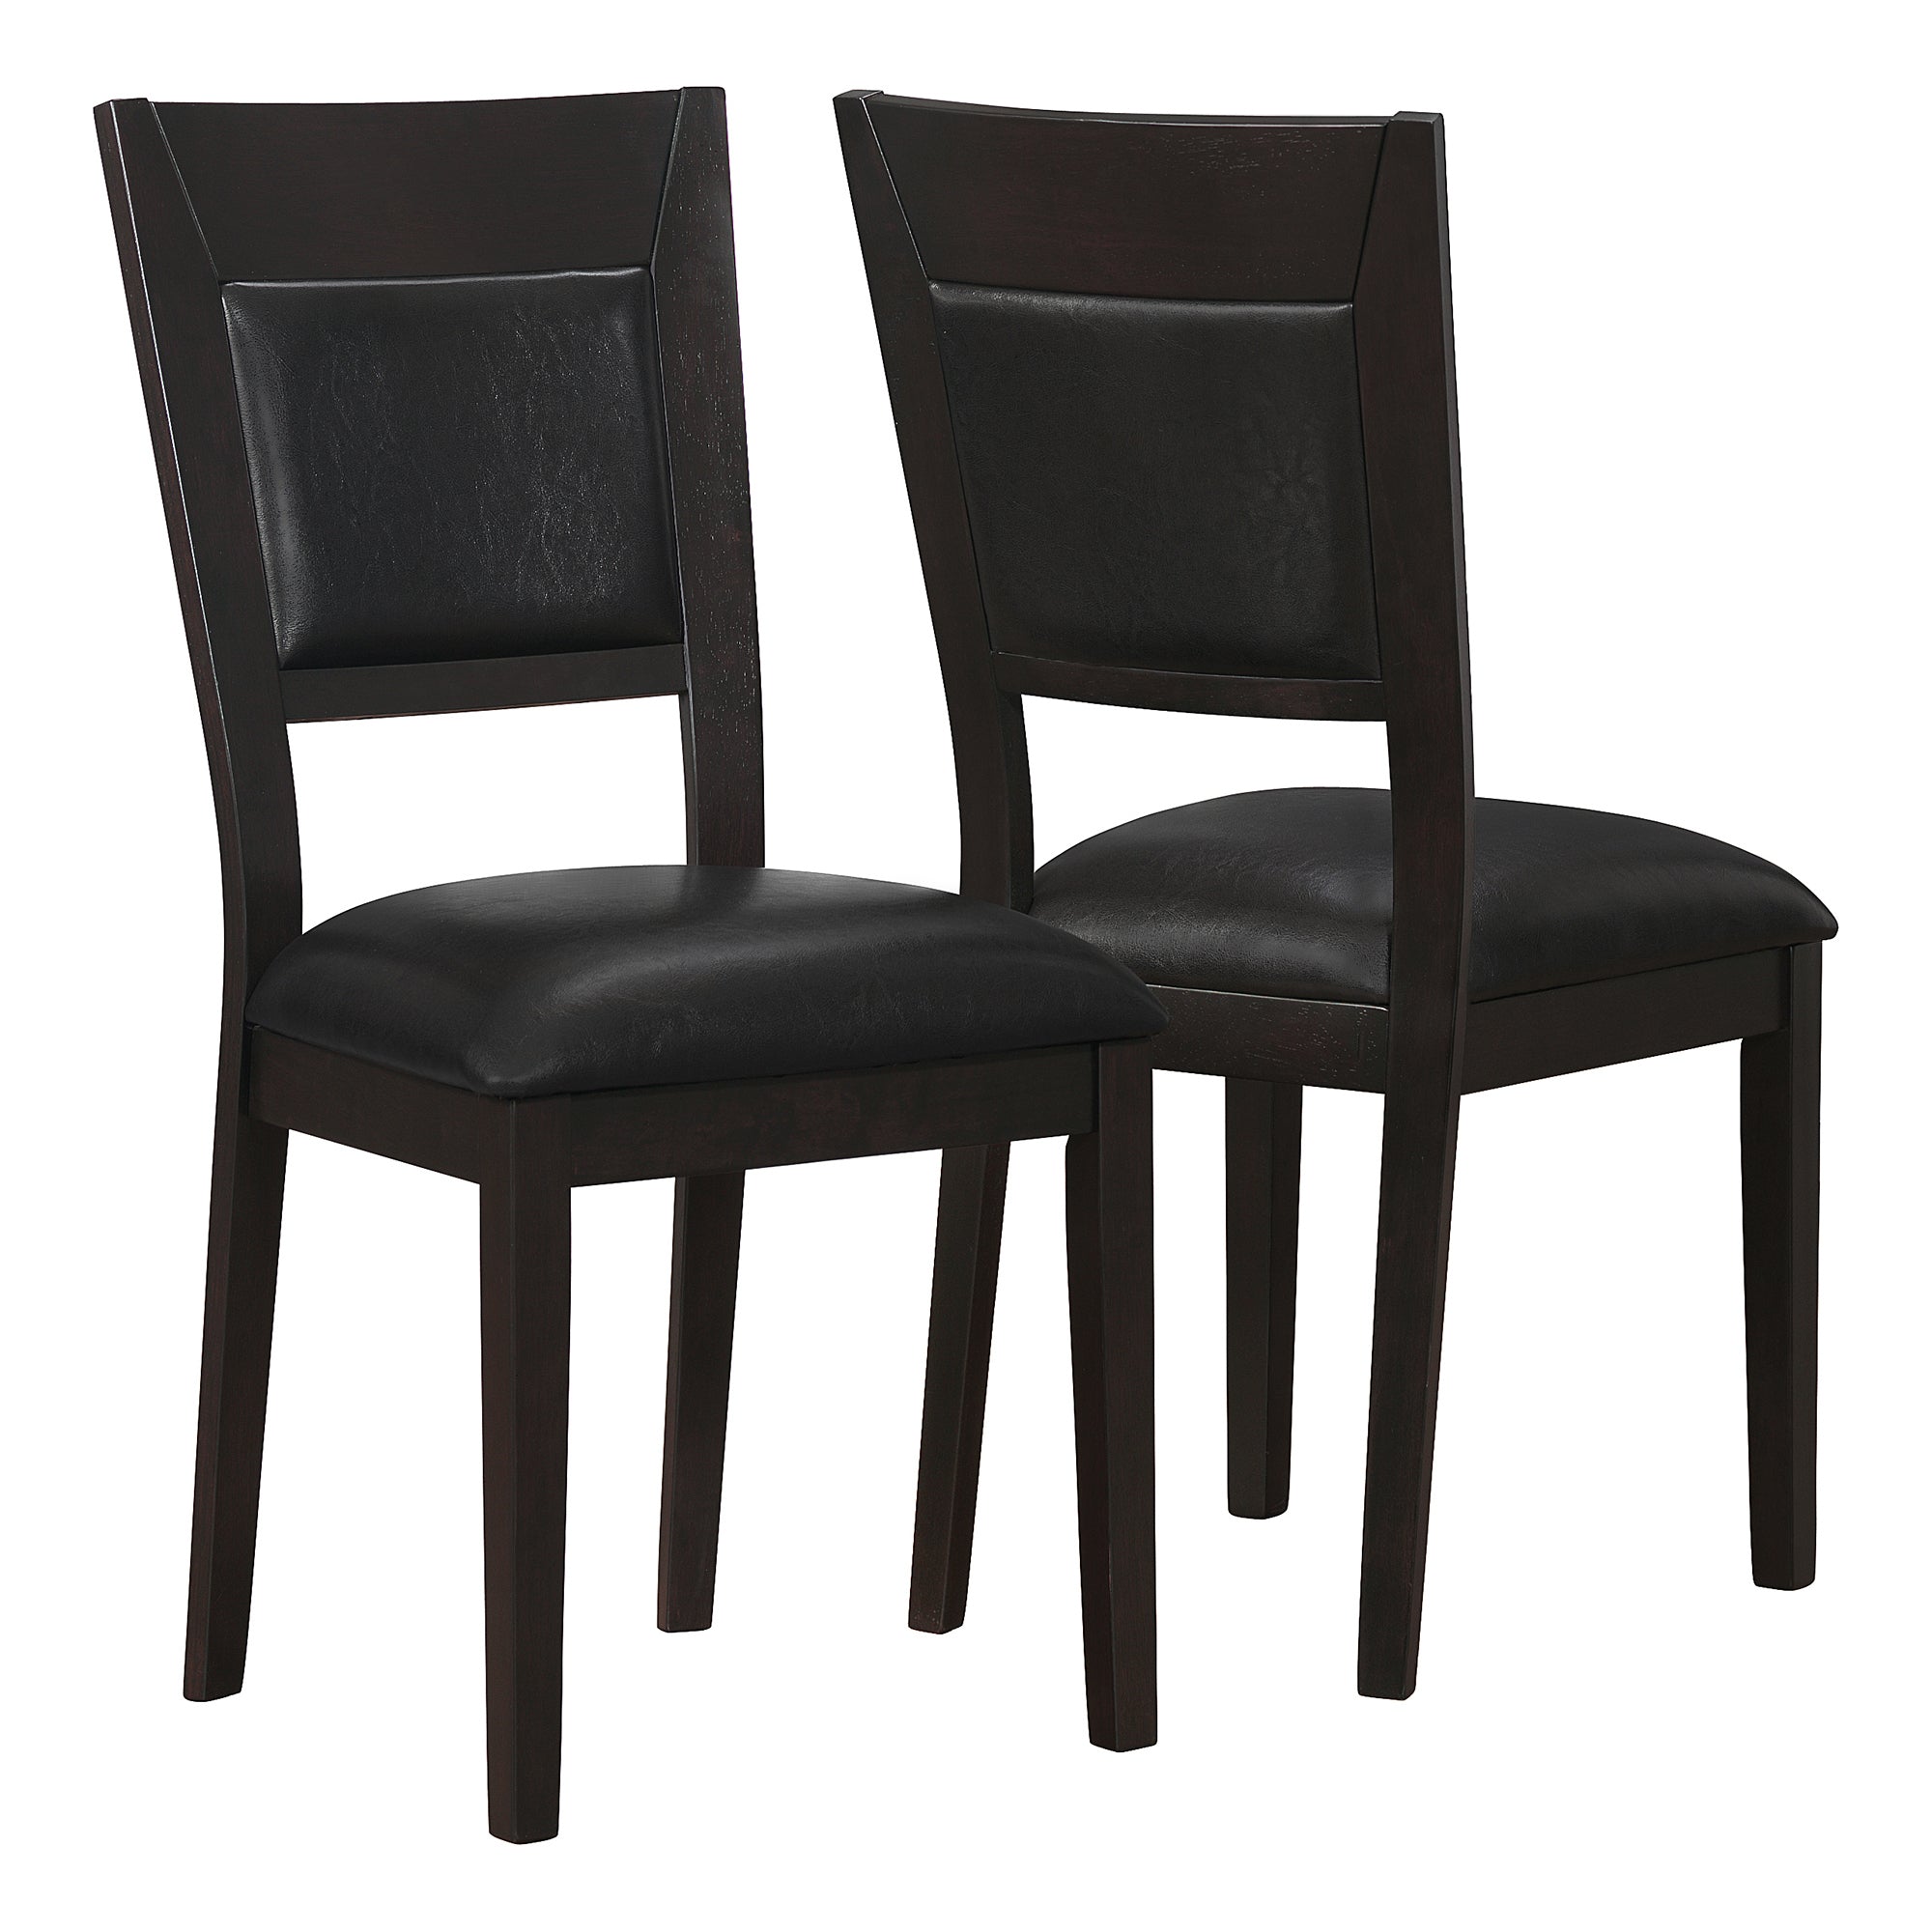 Comfort Wooden Dining Chair With Padded Back (Set of 2 - Espresso)